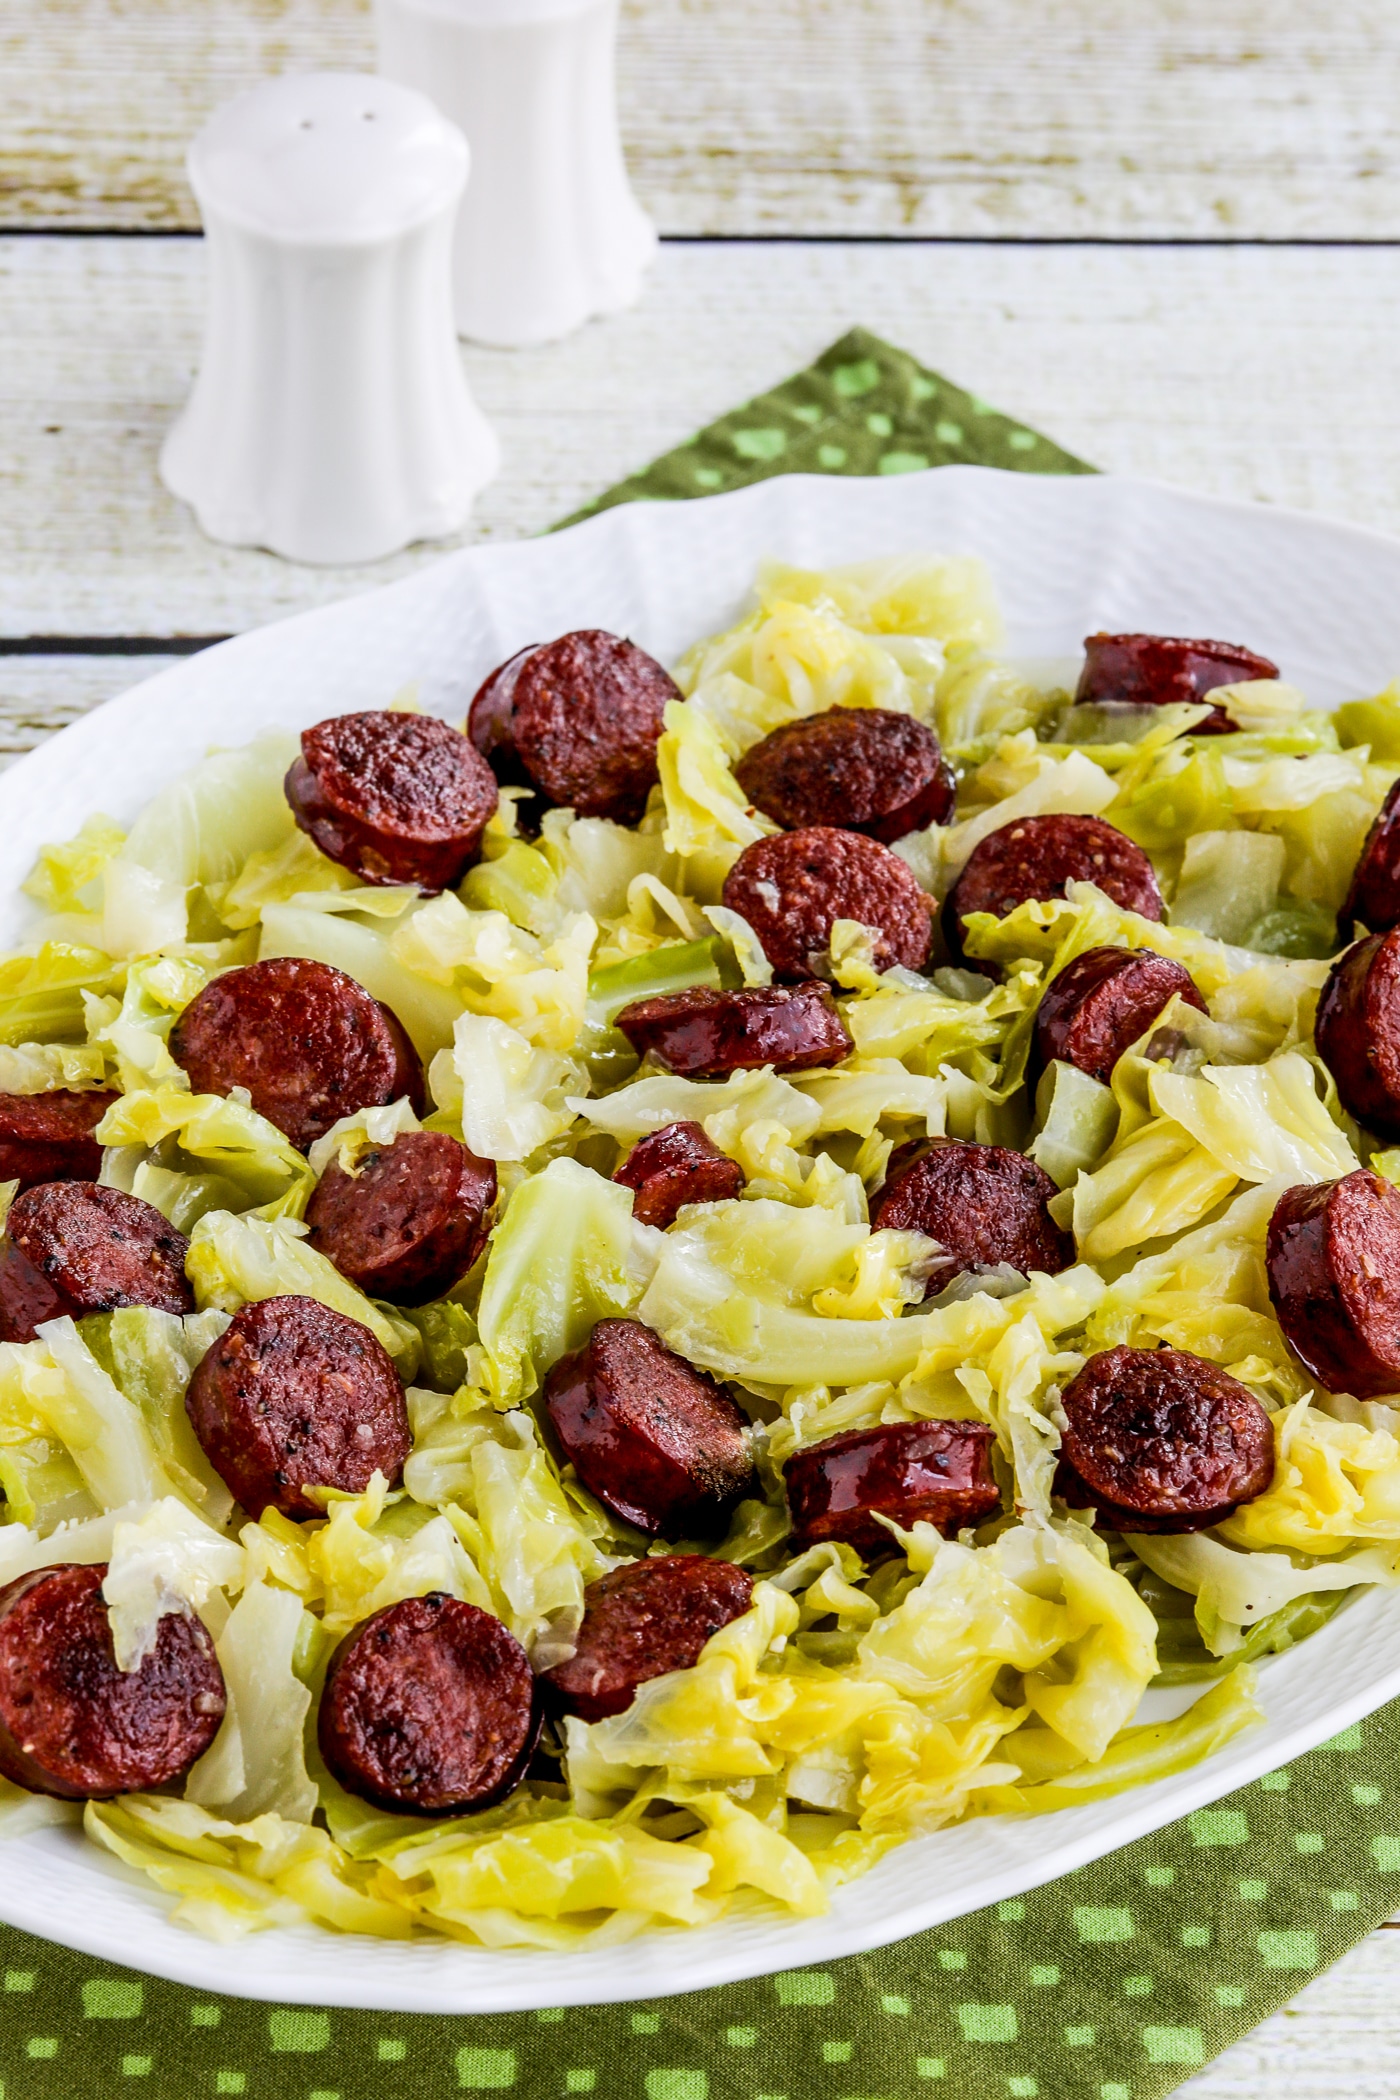 Instant Pot Cabbage and Sausage finished dish on serving plate